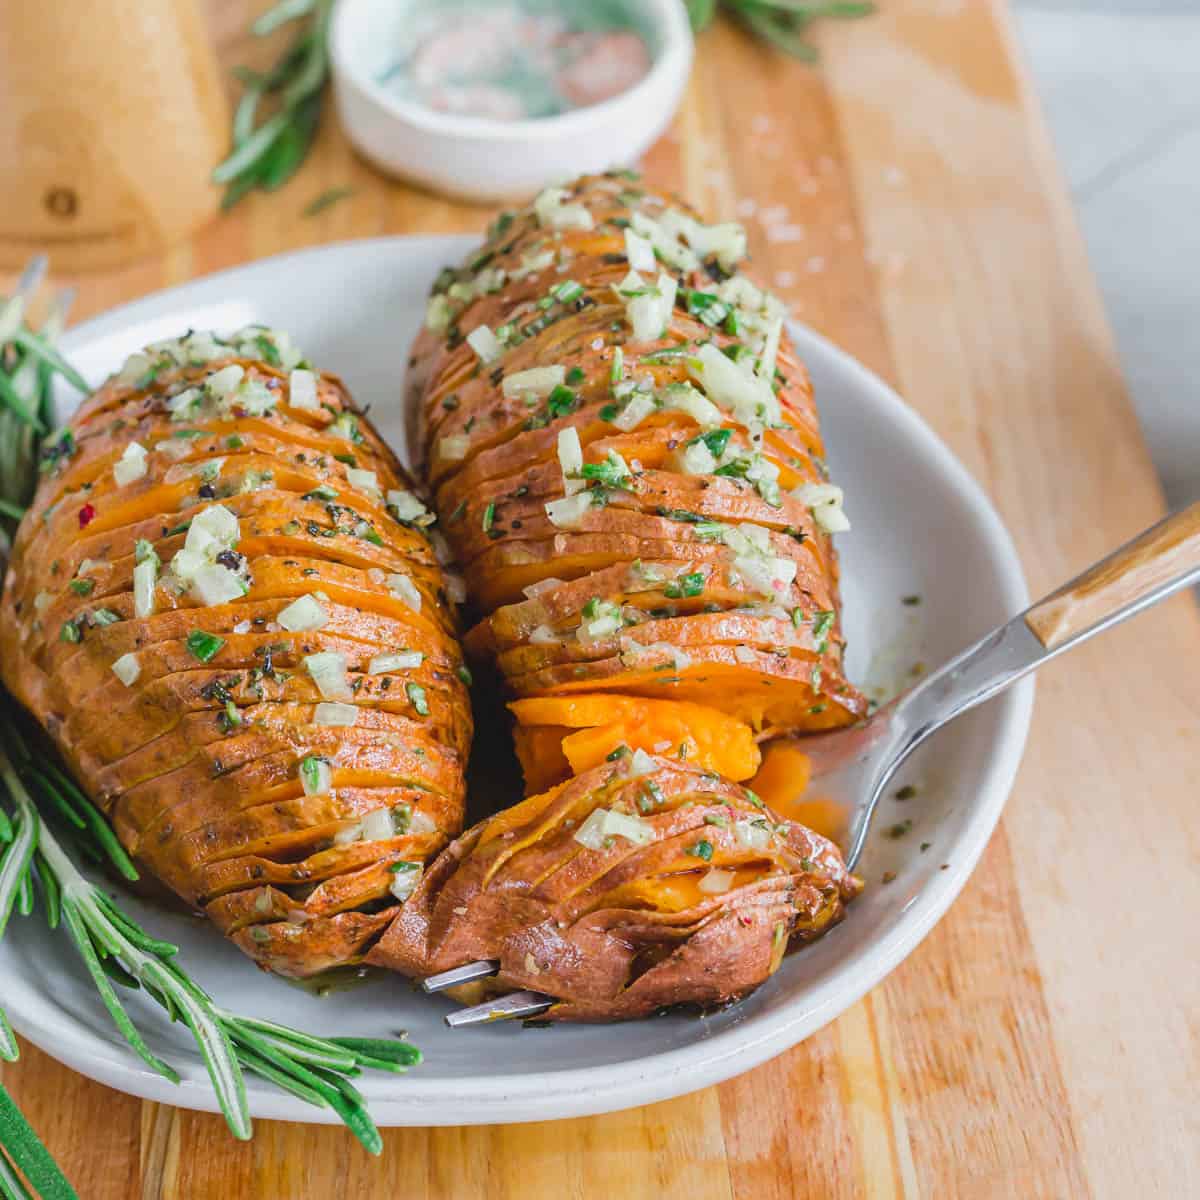 A forkful of roasted hasselback sweet potatoes on a plate with fresh rosemary sprigs.